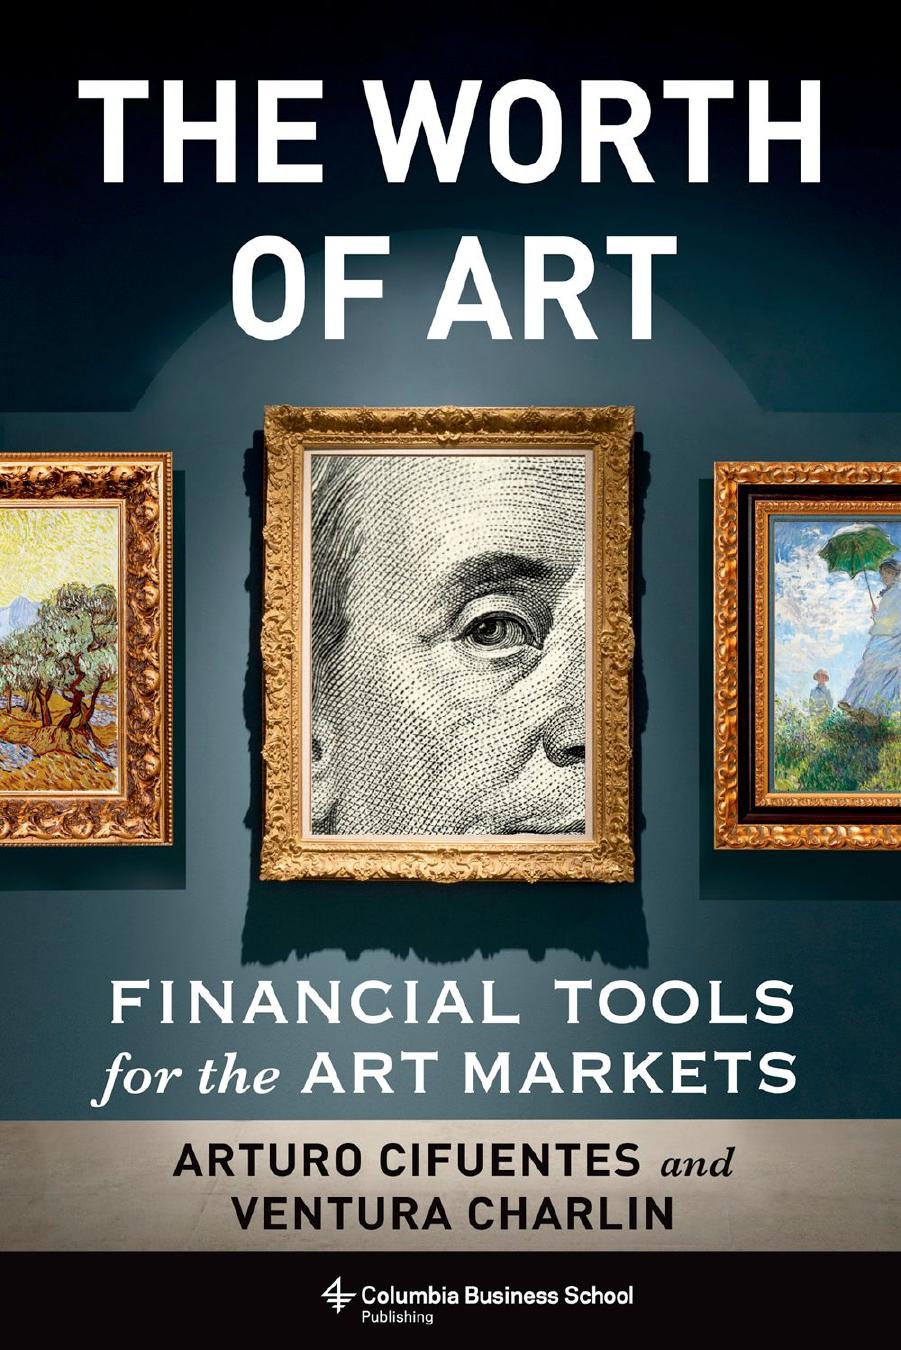 The Worth of Art: Financial Tools for the Art Markets by Arturo Cifuentes; Ventura Charlin